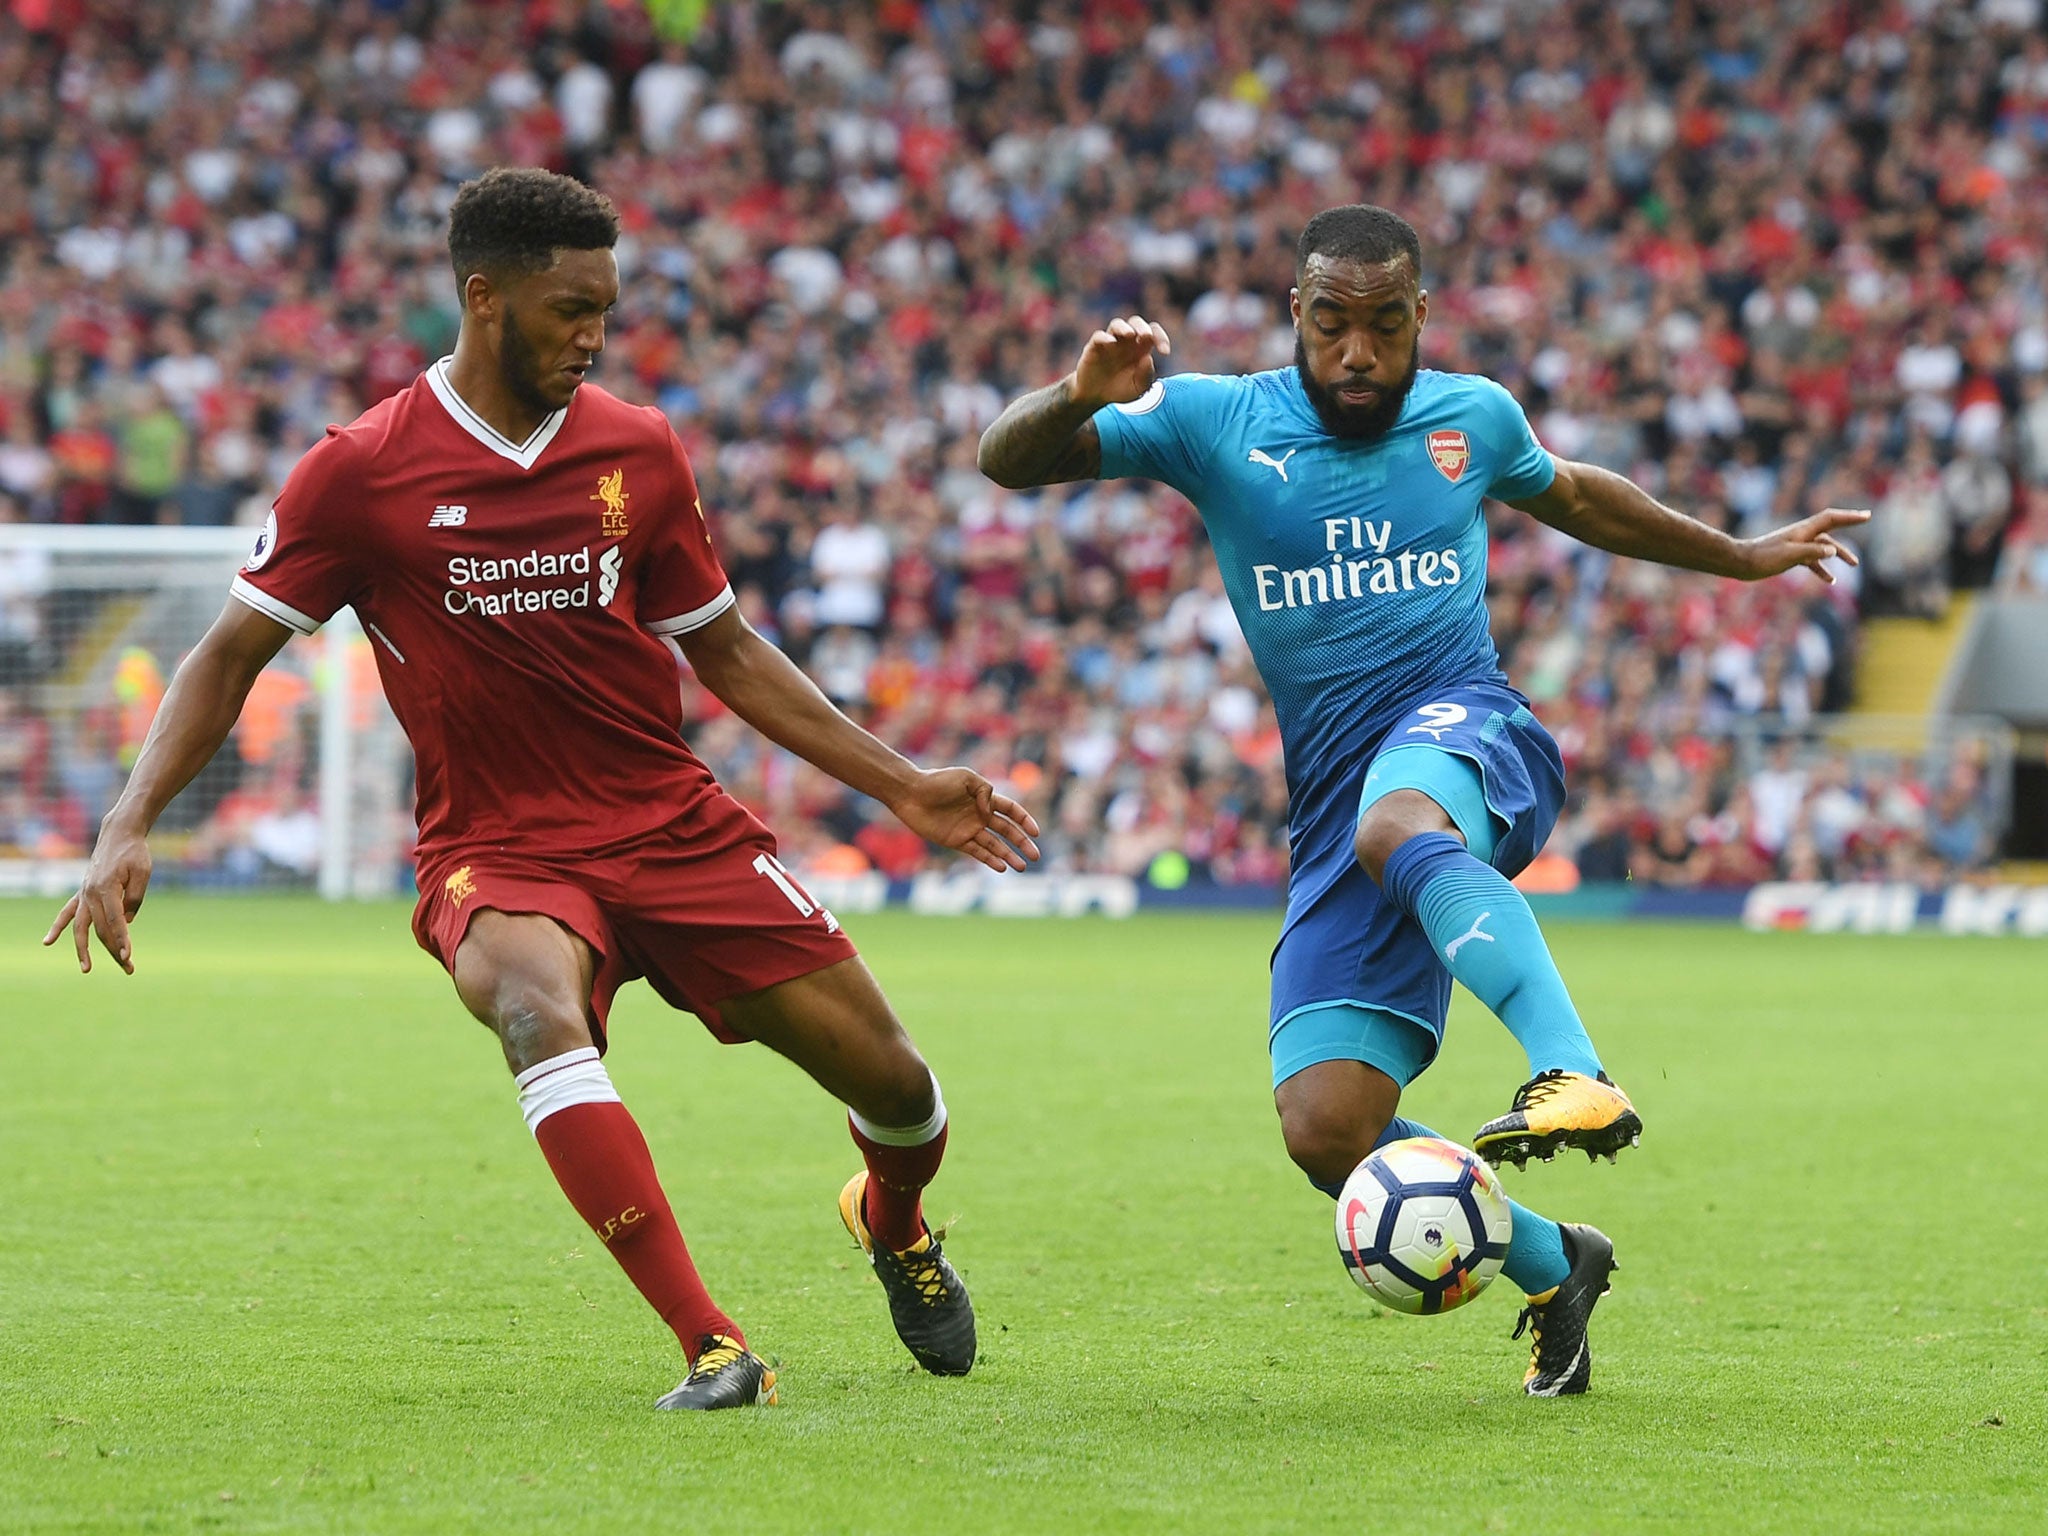 Arsenal vs Liverpool What time does it start, where can I watch it, what TV channel, odds and team news? The Independent The Independent